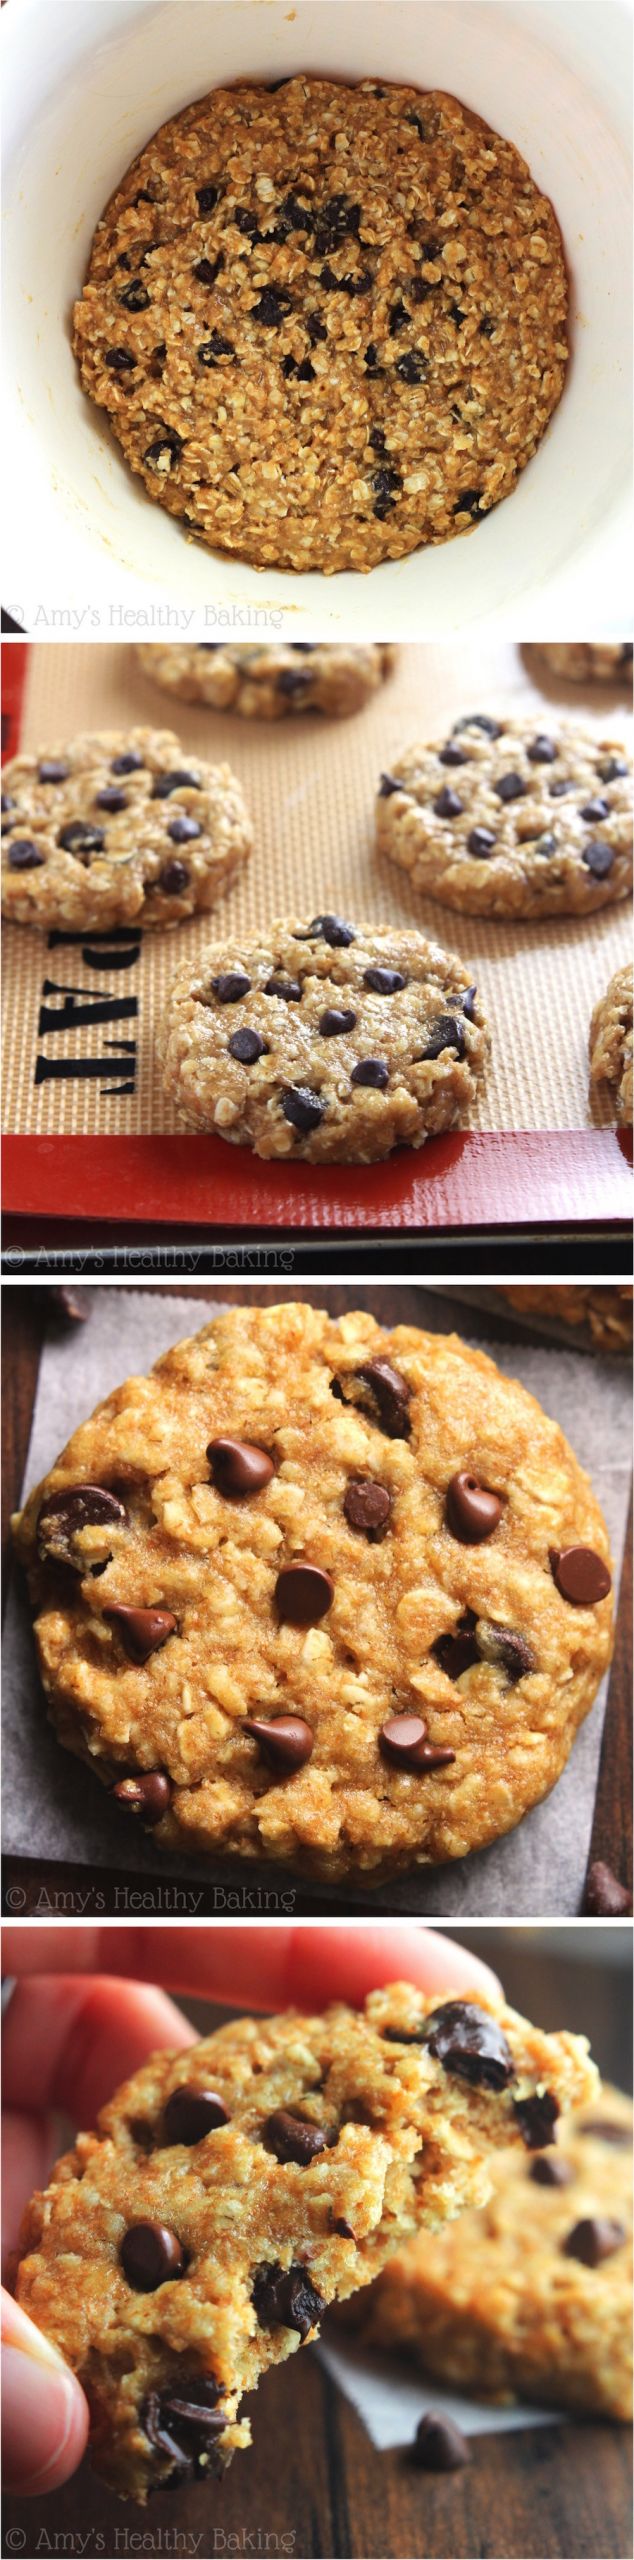 Easy Peanut Butter Oatmeal Cookies
 Chocolate Chip Peanut Butter Oatmeal Cookies Recipe Video